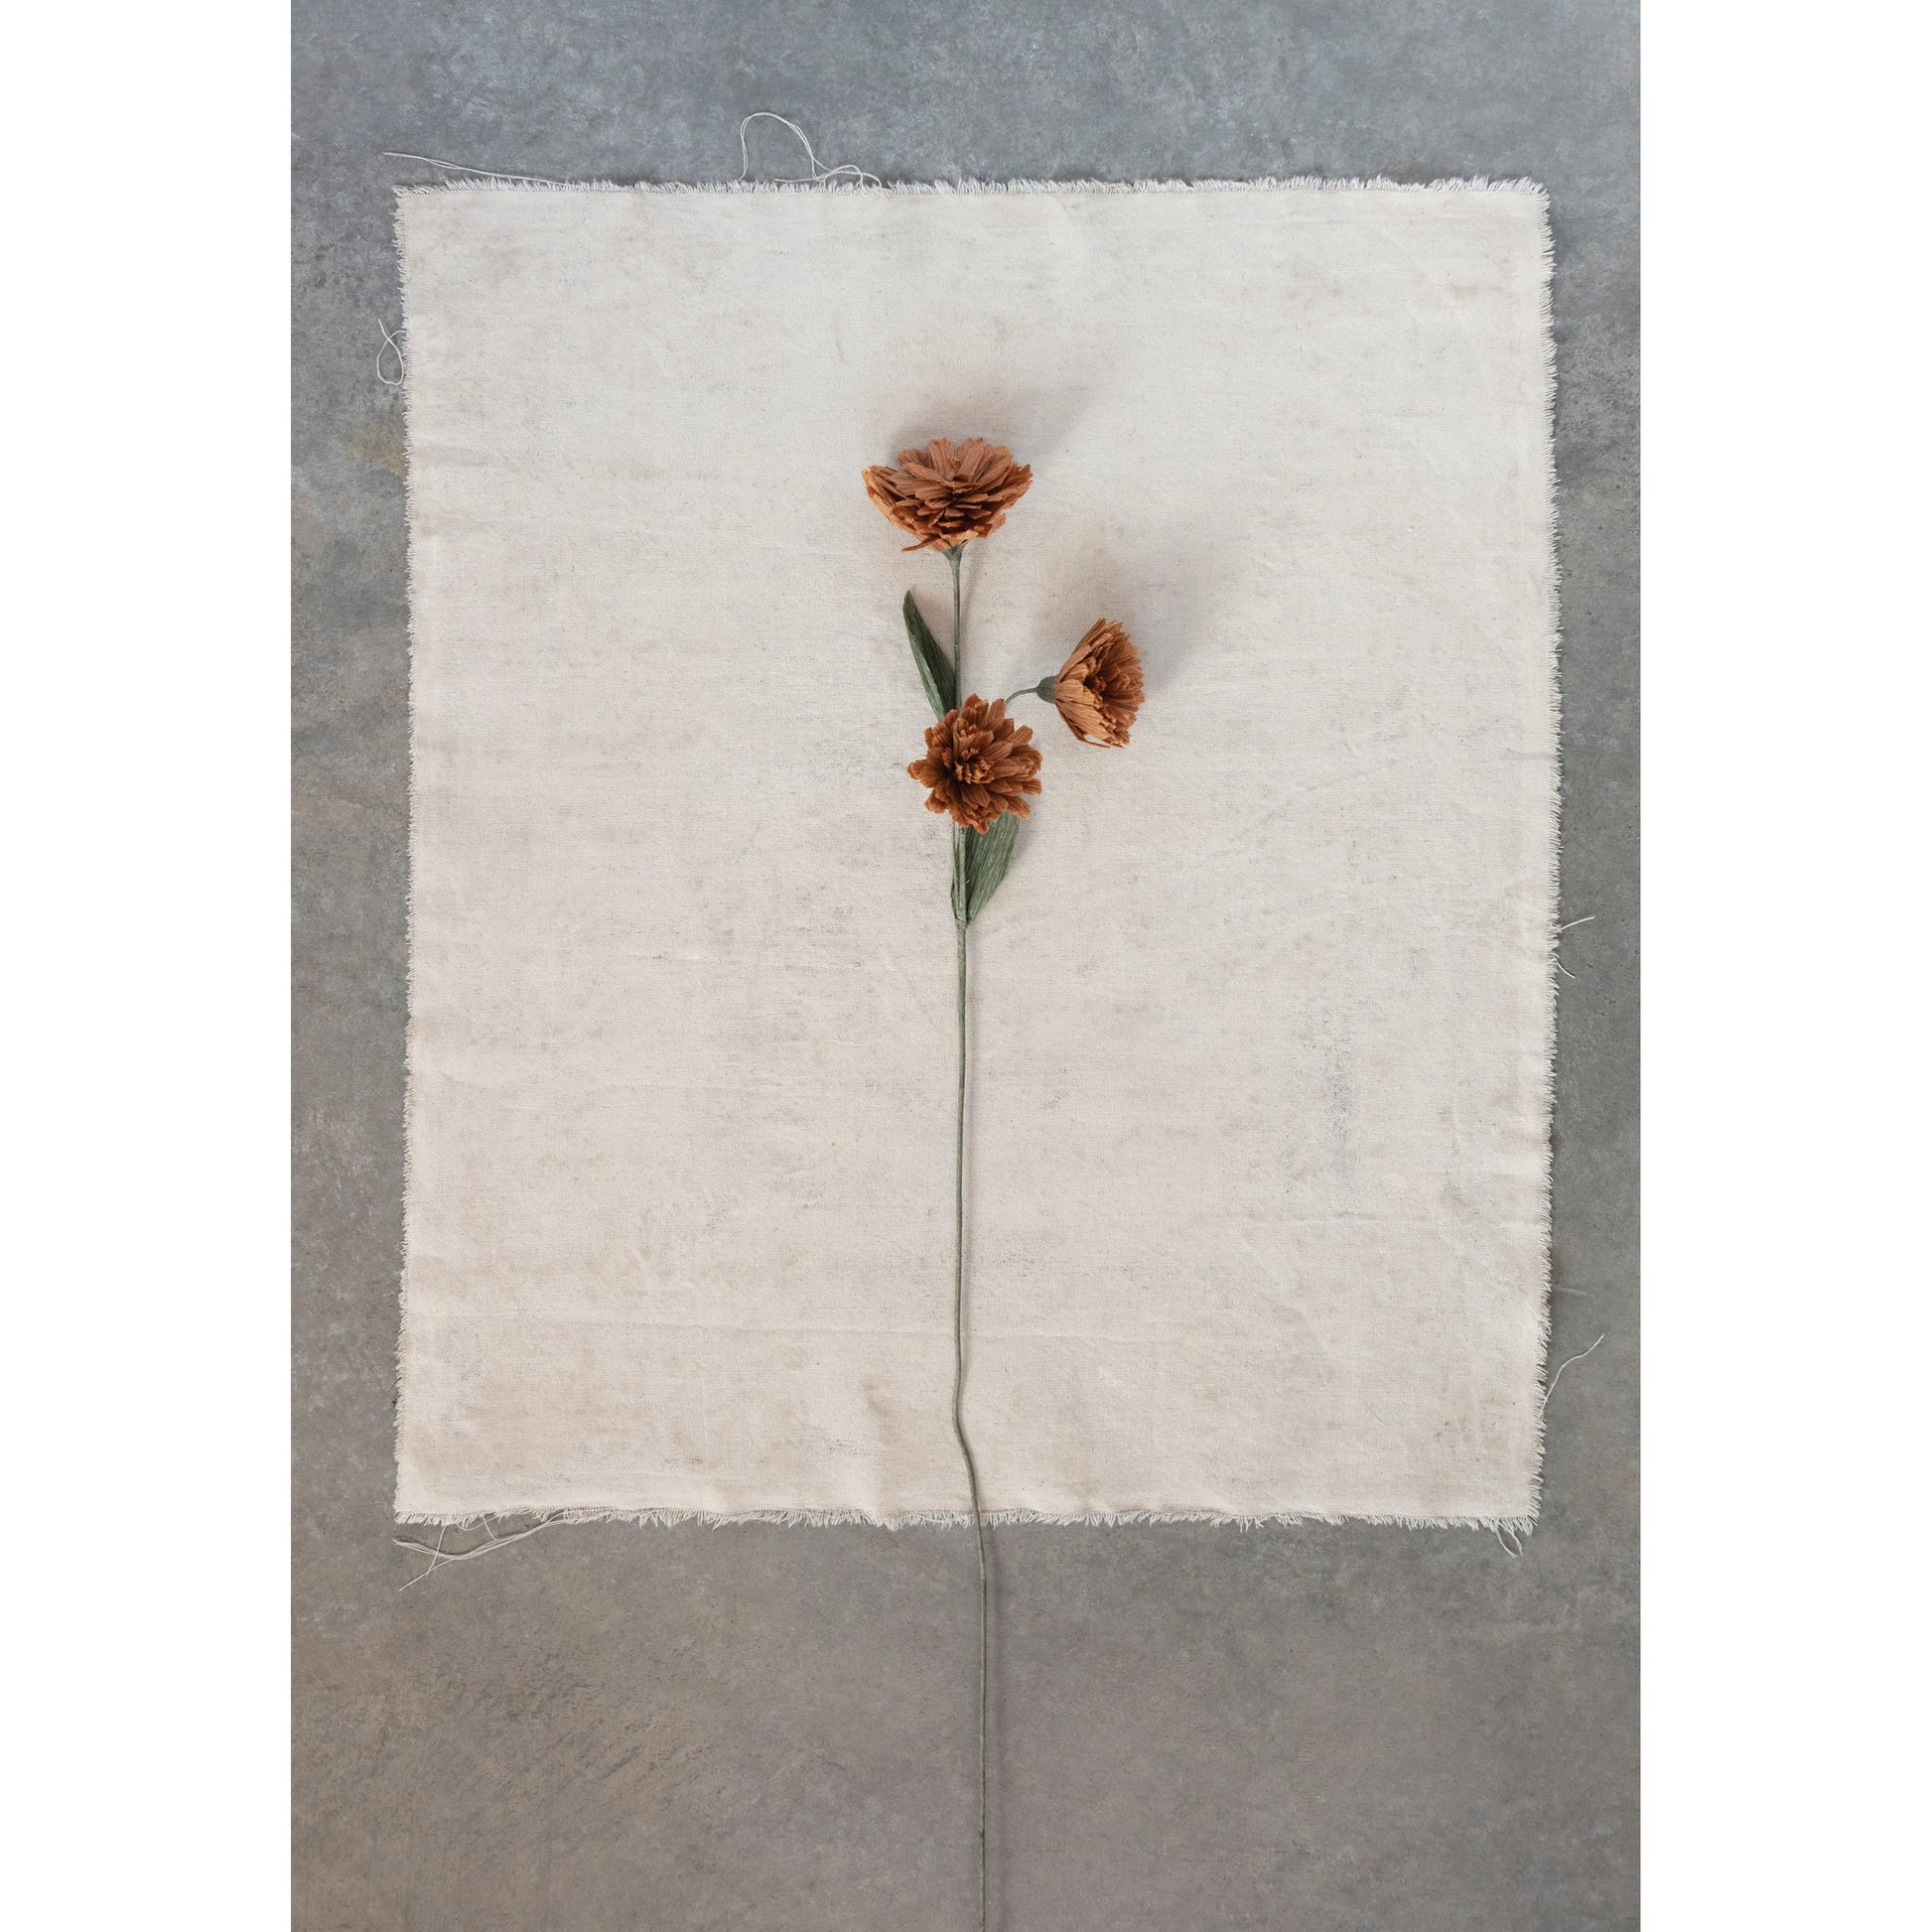 stem with 3 rusty colored mum flowers laying a piece of natural linen.